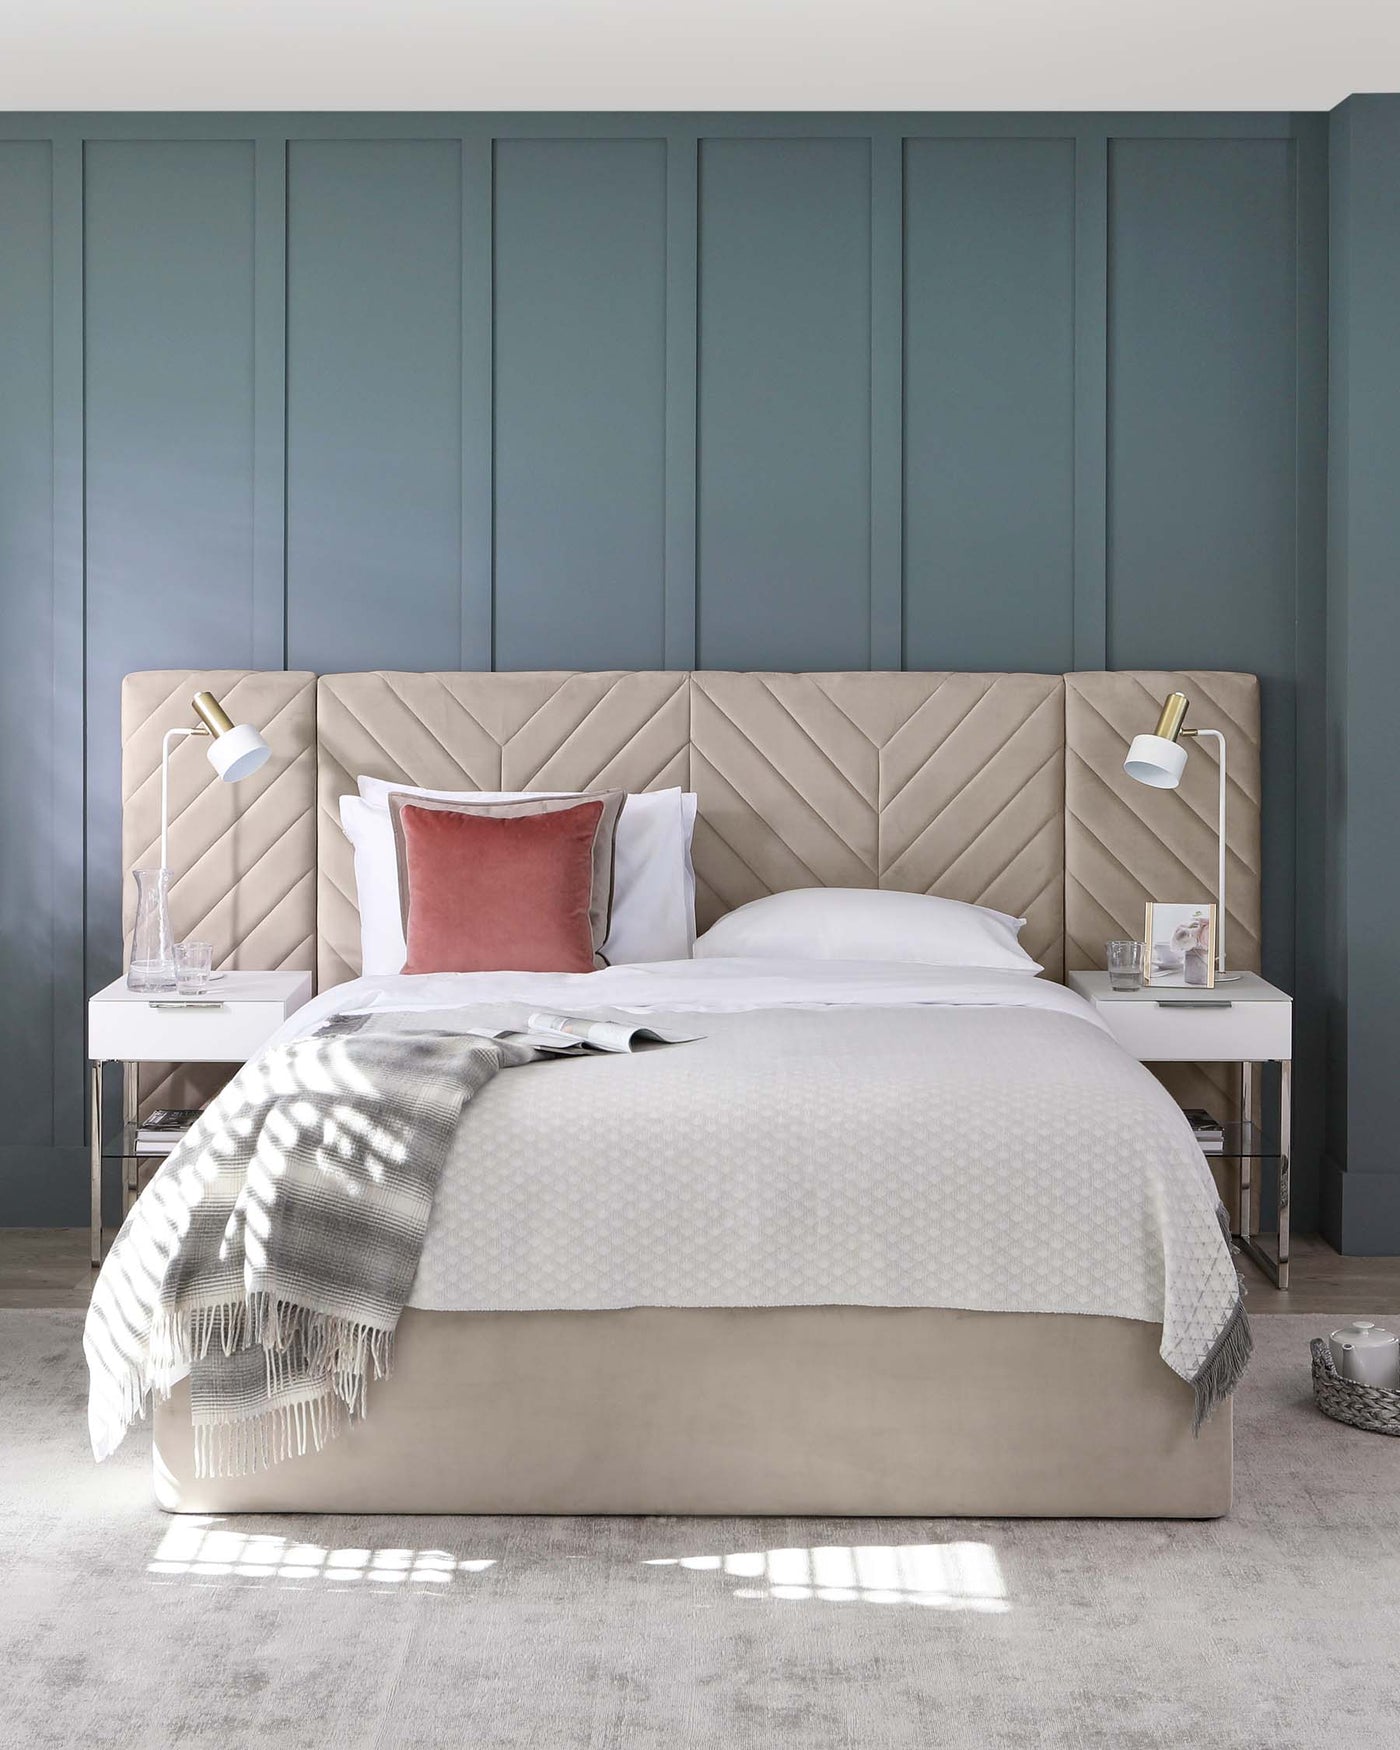 Elegant bedroom featuring a plush, oversize upholstered bed with a tall, chevron-patterned headboard in a neutral colour. Flanking the bed are two sleek, white modern nightstands, each accessorized with a contemporary metal reading lamp.